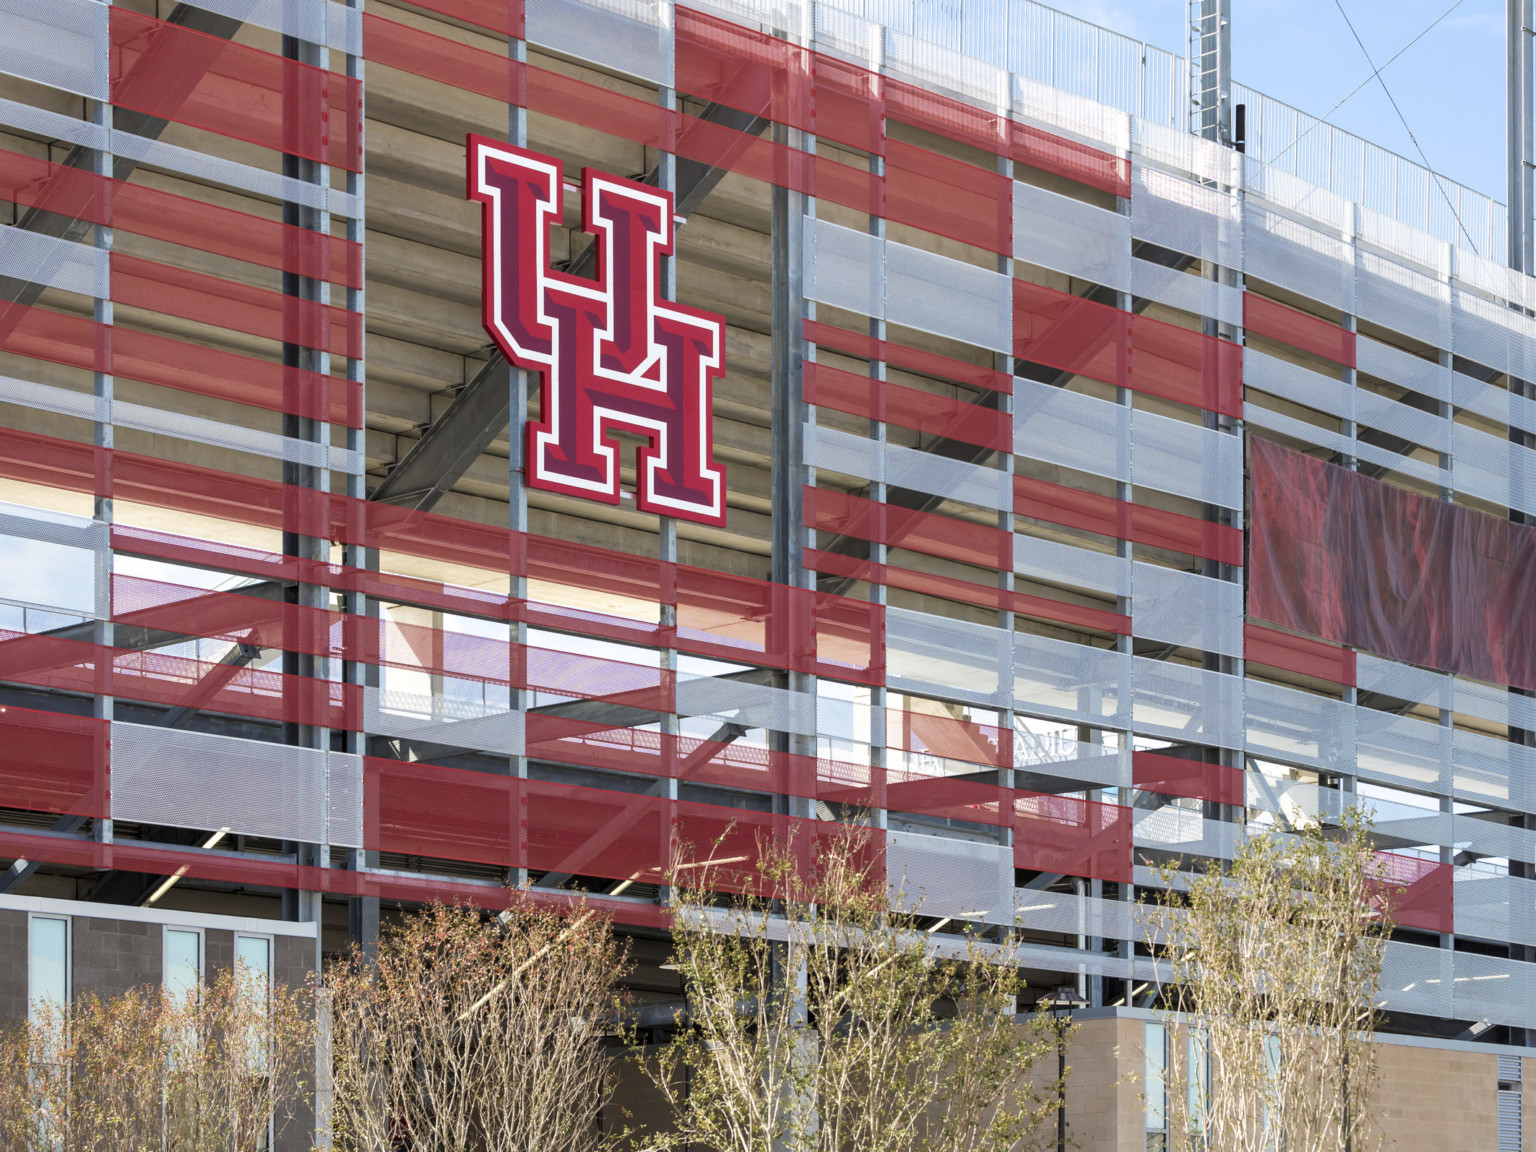 Closeup of UH logo on red and white sunscreen facade of stadium with view of the stepped underside of bleachers